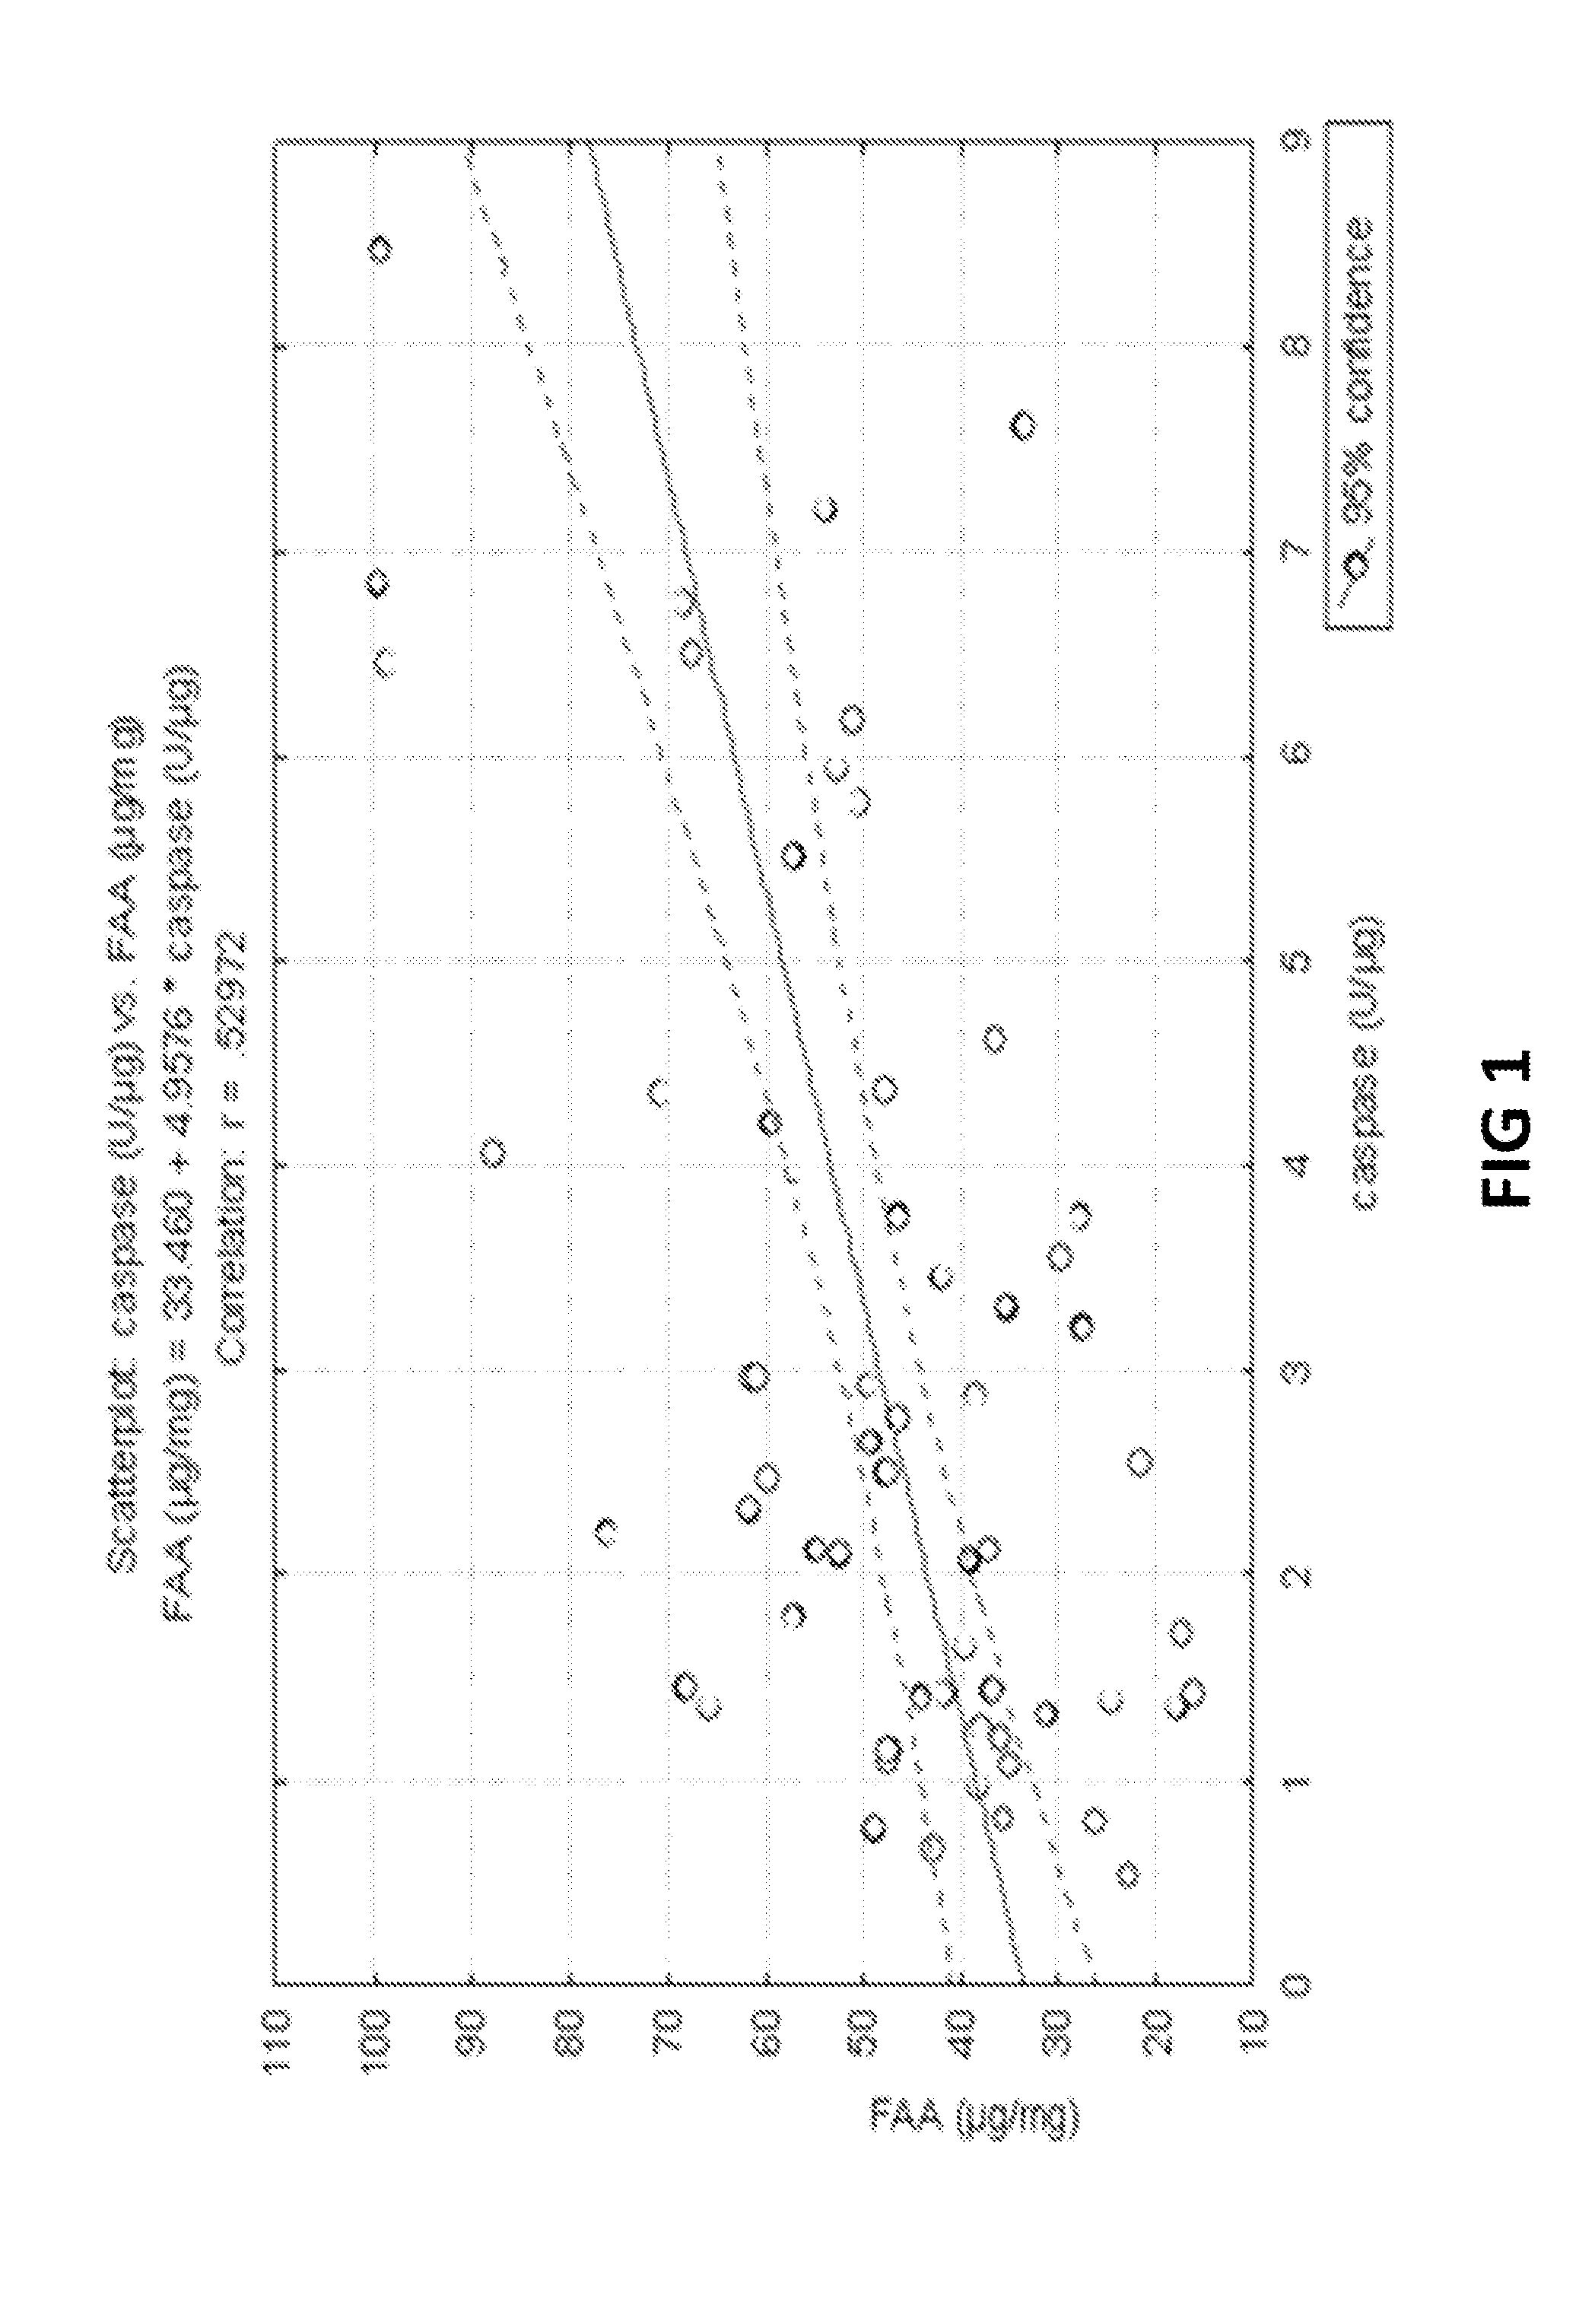 Methods For Activating Caspase-14 Expression In Human Skin